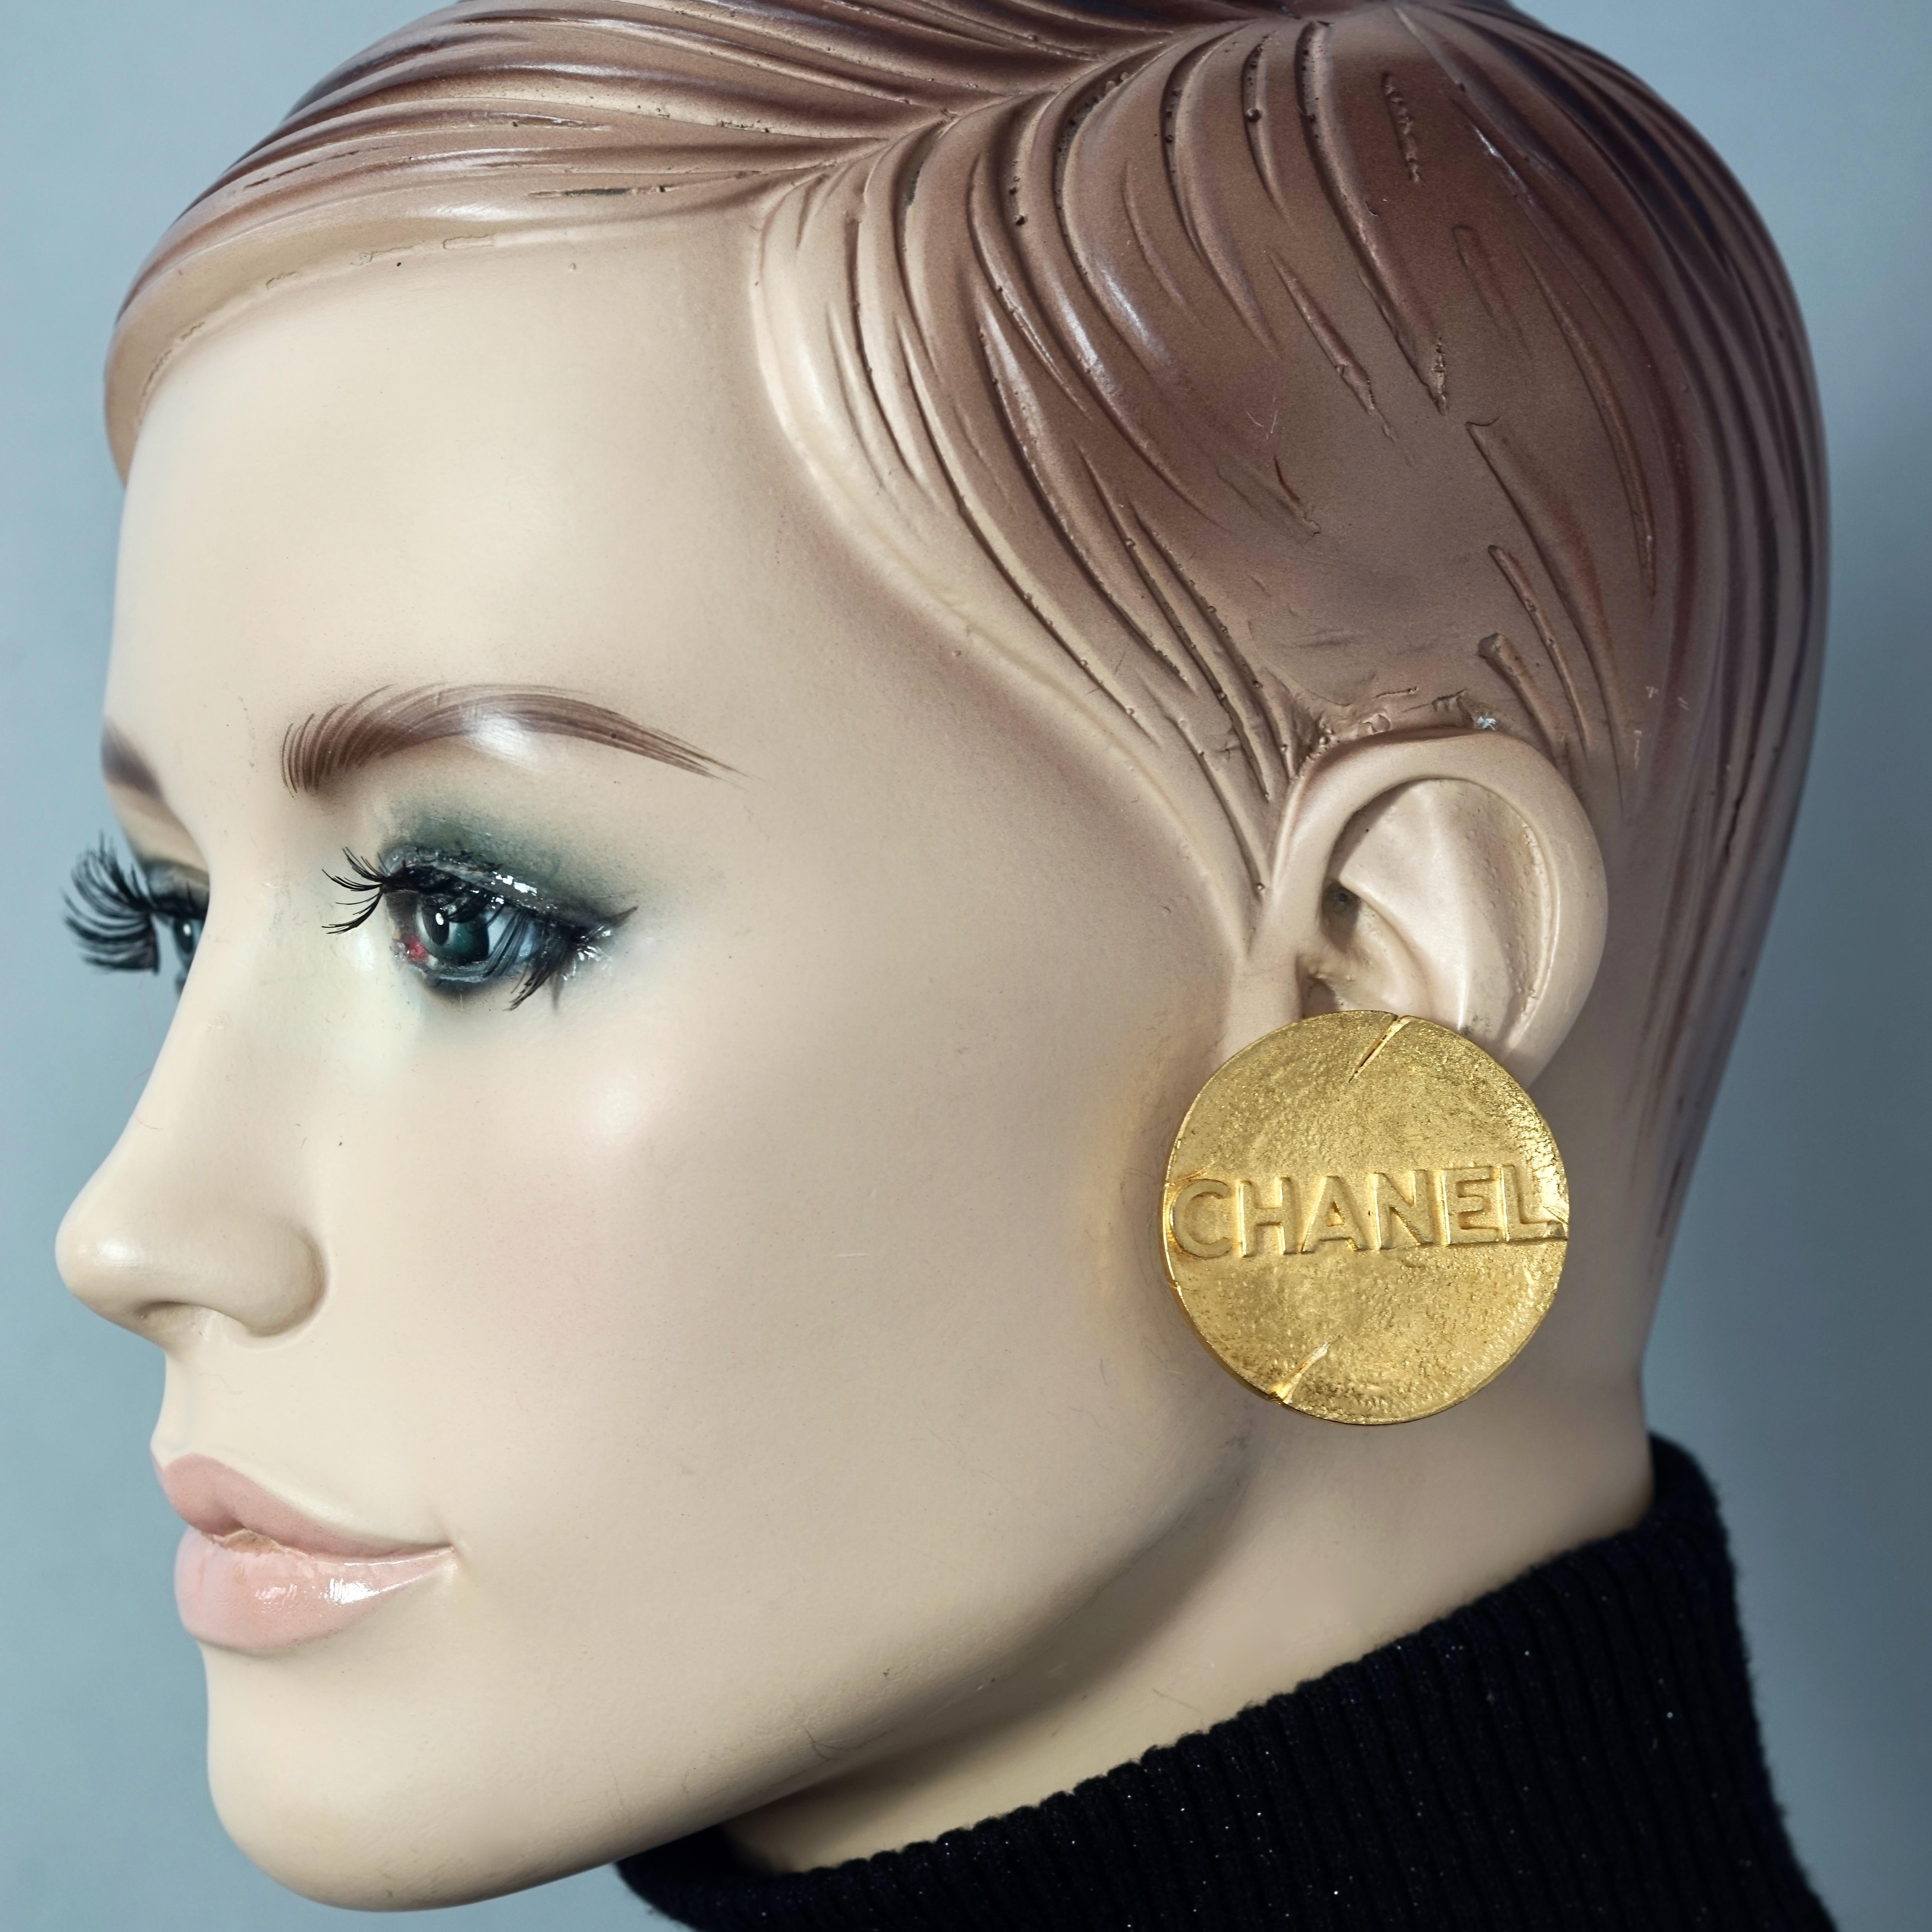 Vintage Massive 1993 CHANEL Spelled Disc Medallion Earrings

Measurements:
Height: 1.57 inches (4 cm)
Width: 1.57 inches (4 cm)
Weight per Earring: 21 grams

Features:
- 100% Authentic CHANEL.
- Massive disc with embossed spelled CHANEL across.
-